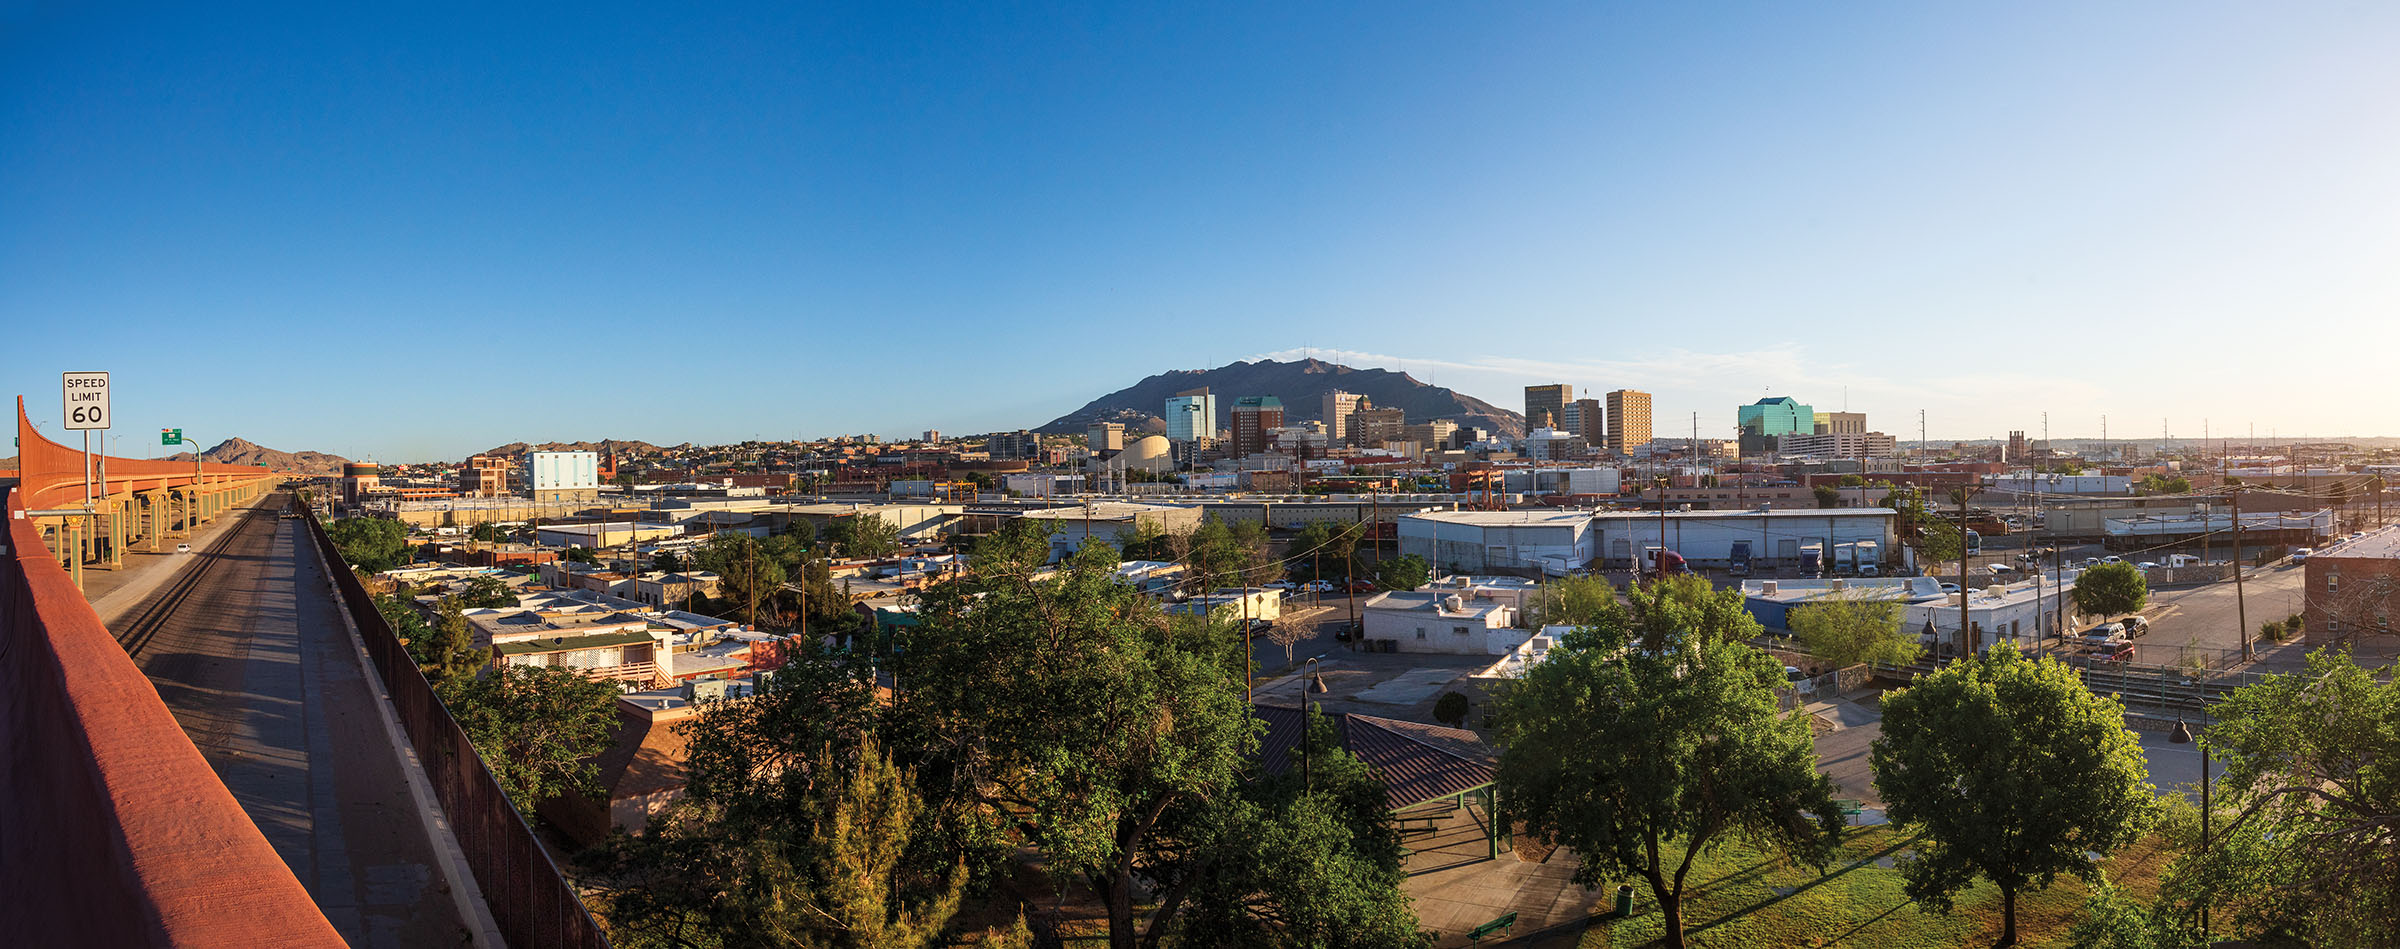 An over view of El Paso, TX.